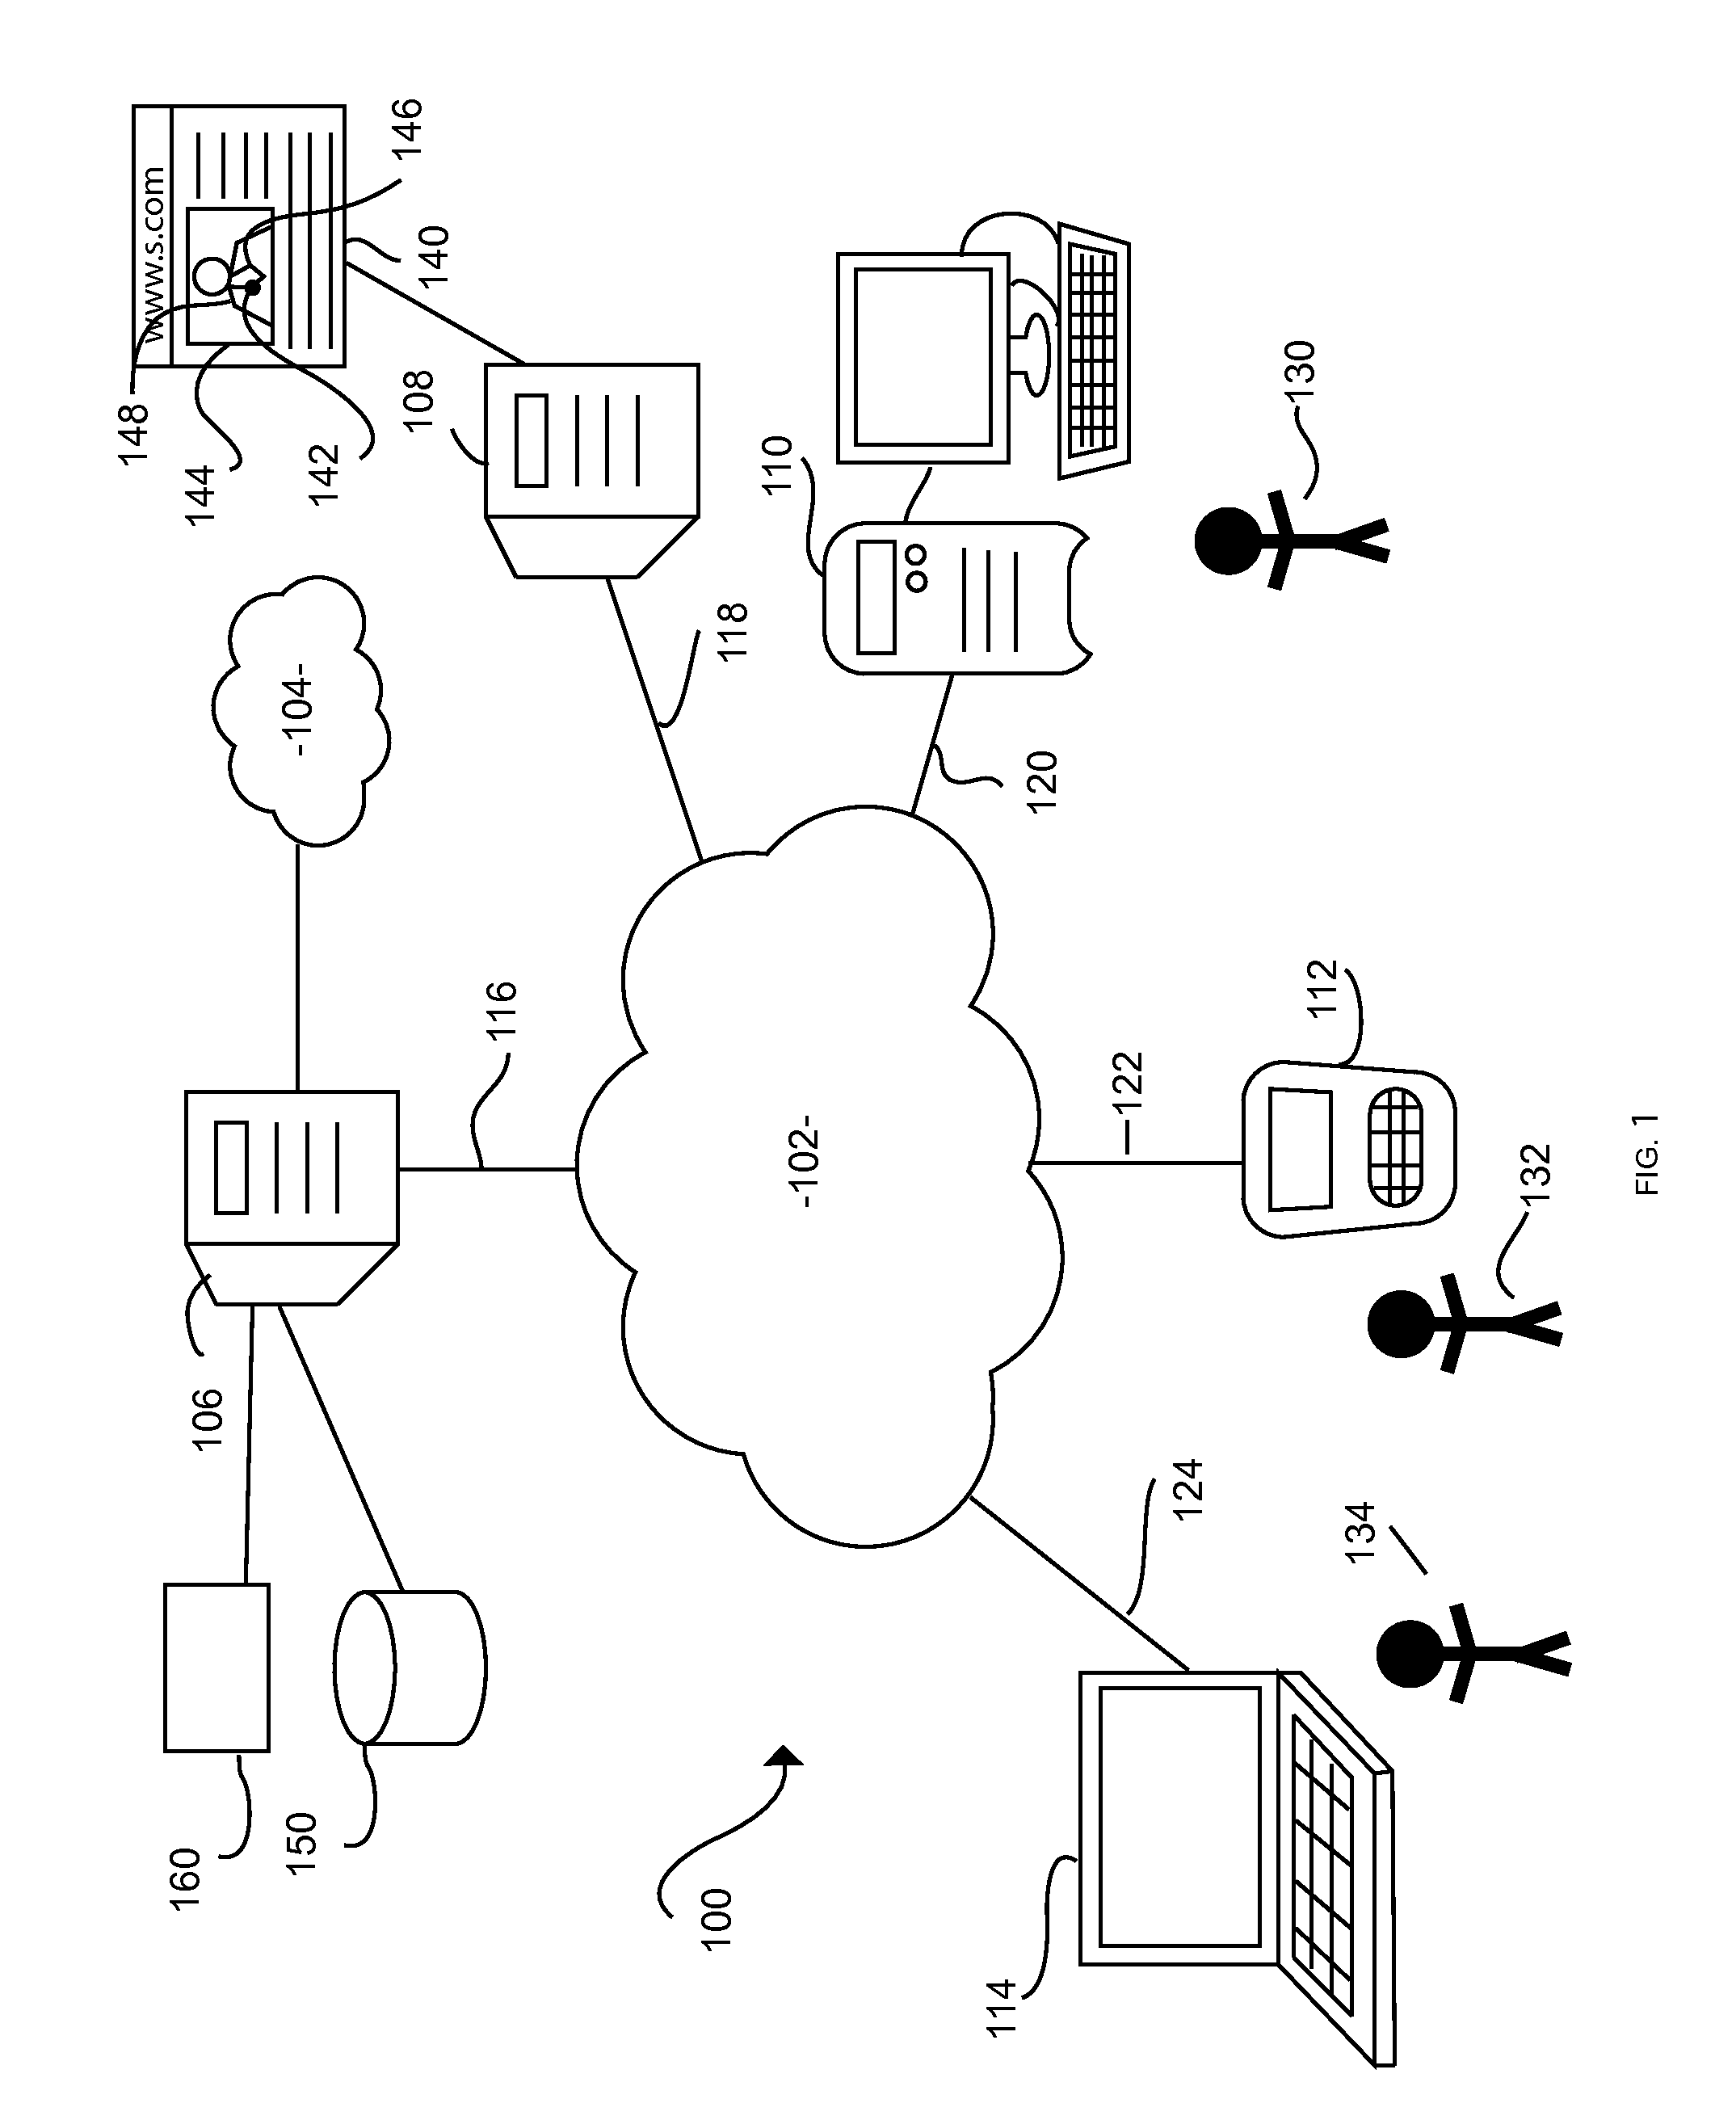 Method and system for collaborative or crowdsourced tagging of images